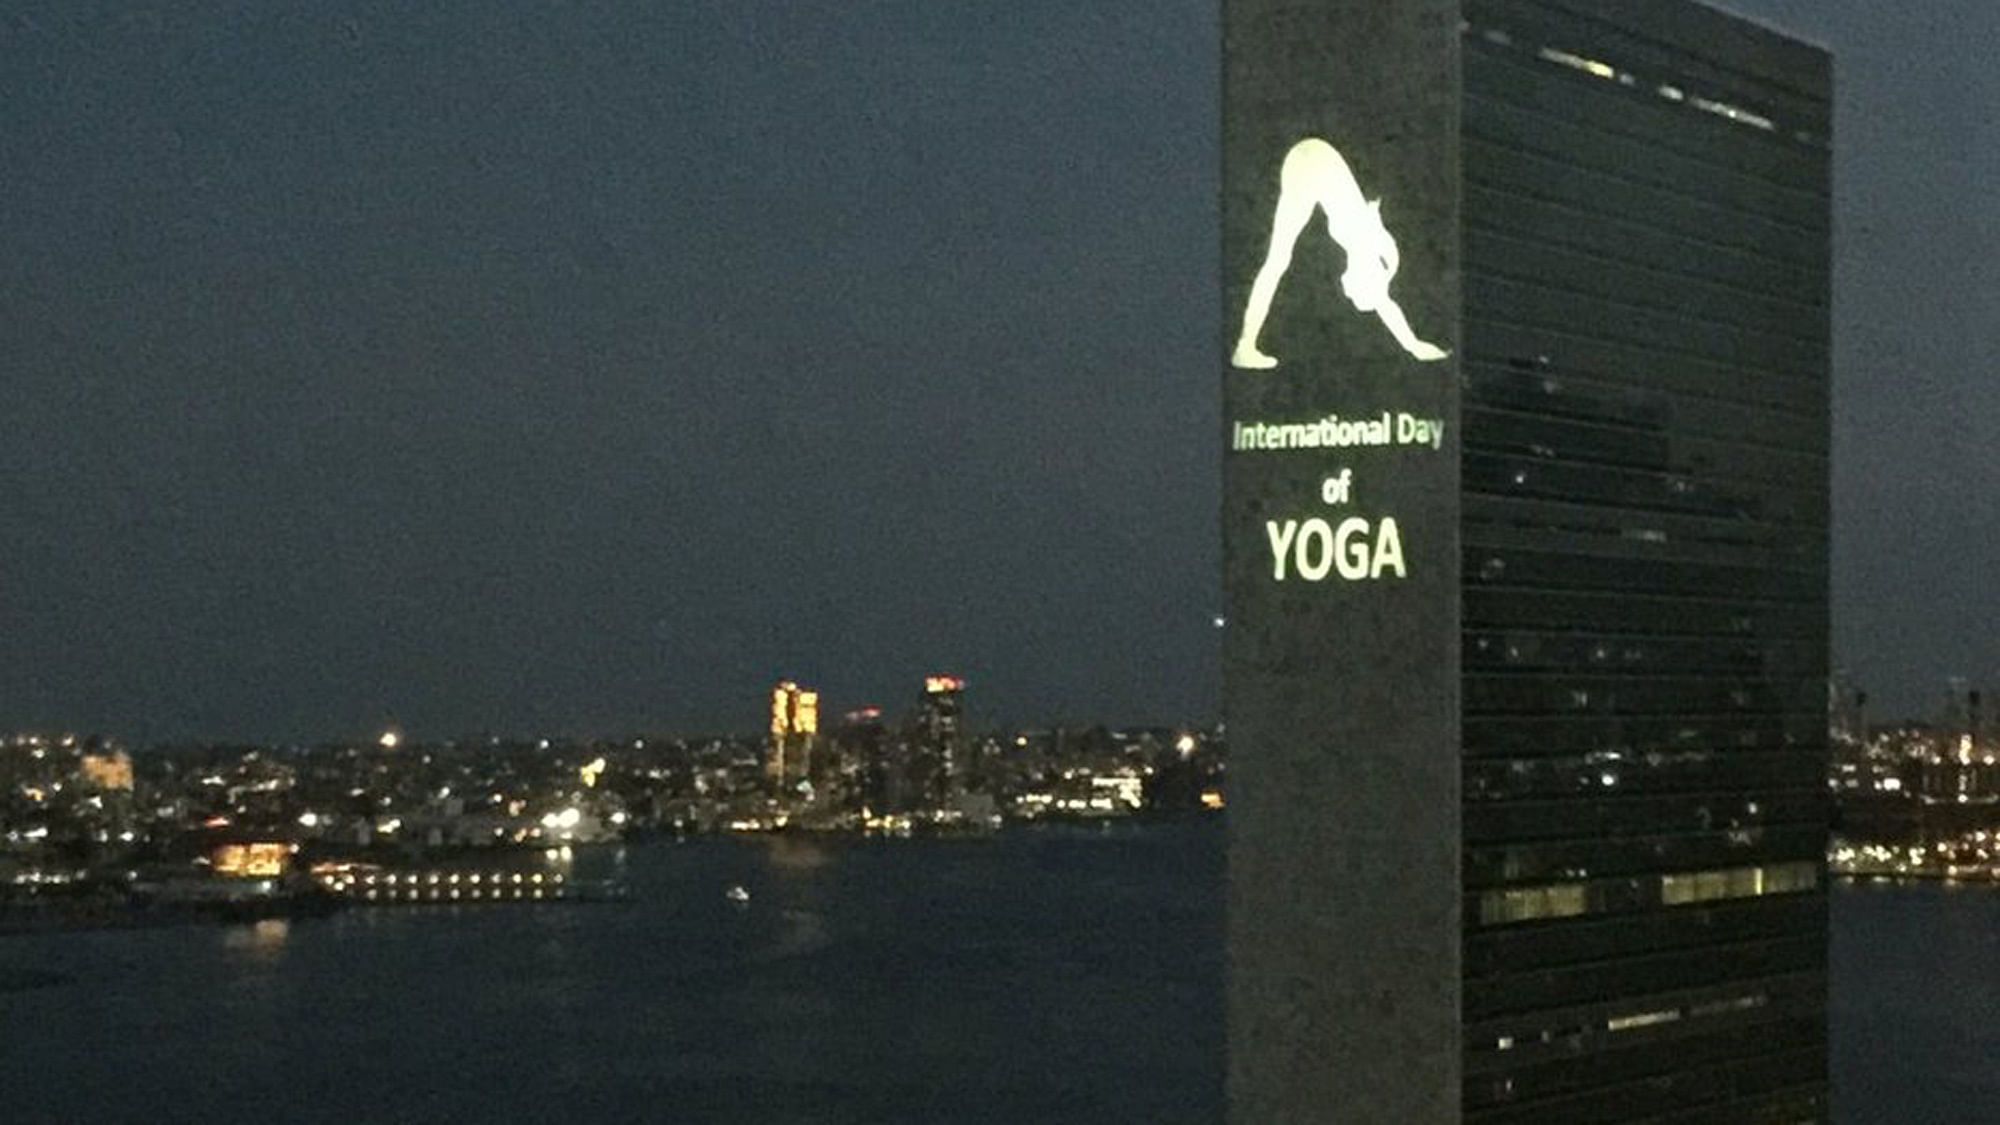 UN Headquarters in New York city set to light up with Yoga posture projections. (Photo Courtesy: <a href="https://twitter.com/akbaruddinindia">Syed Akbarudding/Twitter</a>)